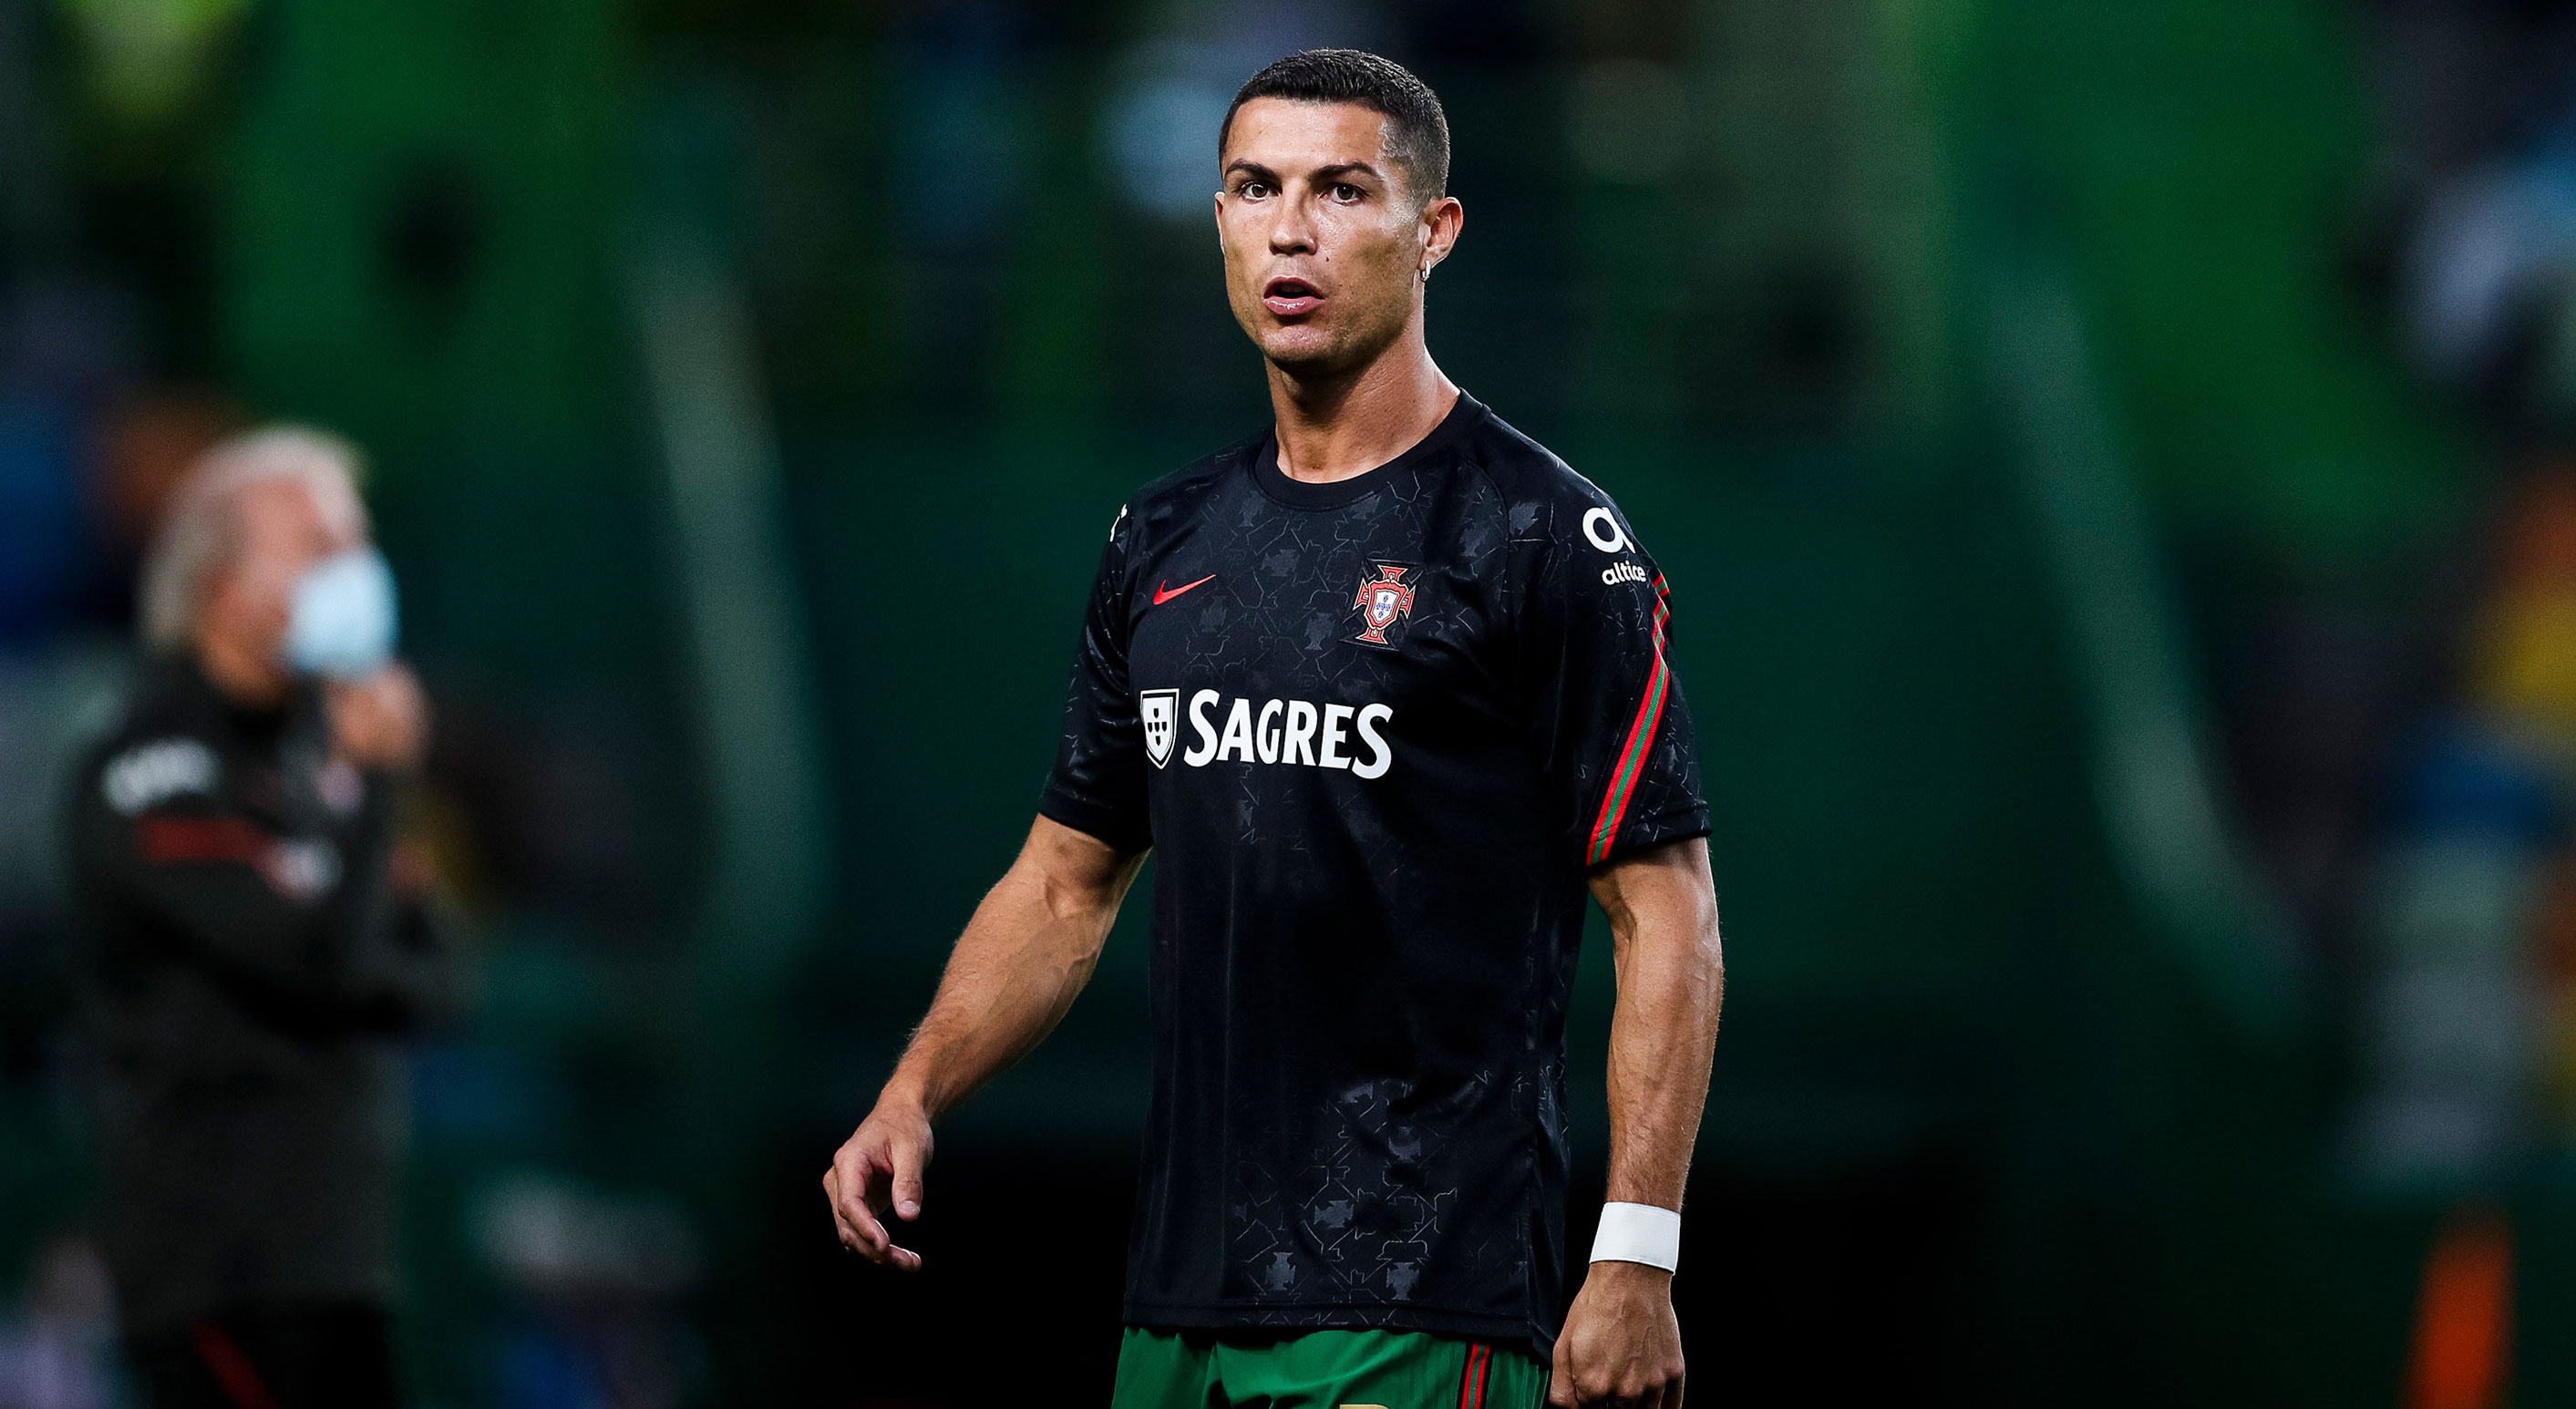 Cristiano Ronaldo warms up before a match between Portugal and Spain at the Jose Alvalade stadium on October 7 in Lisbon, Portugal.